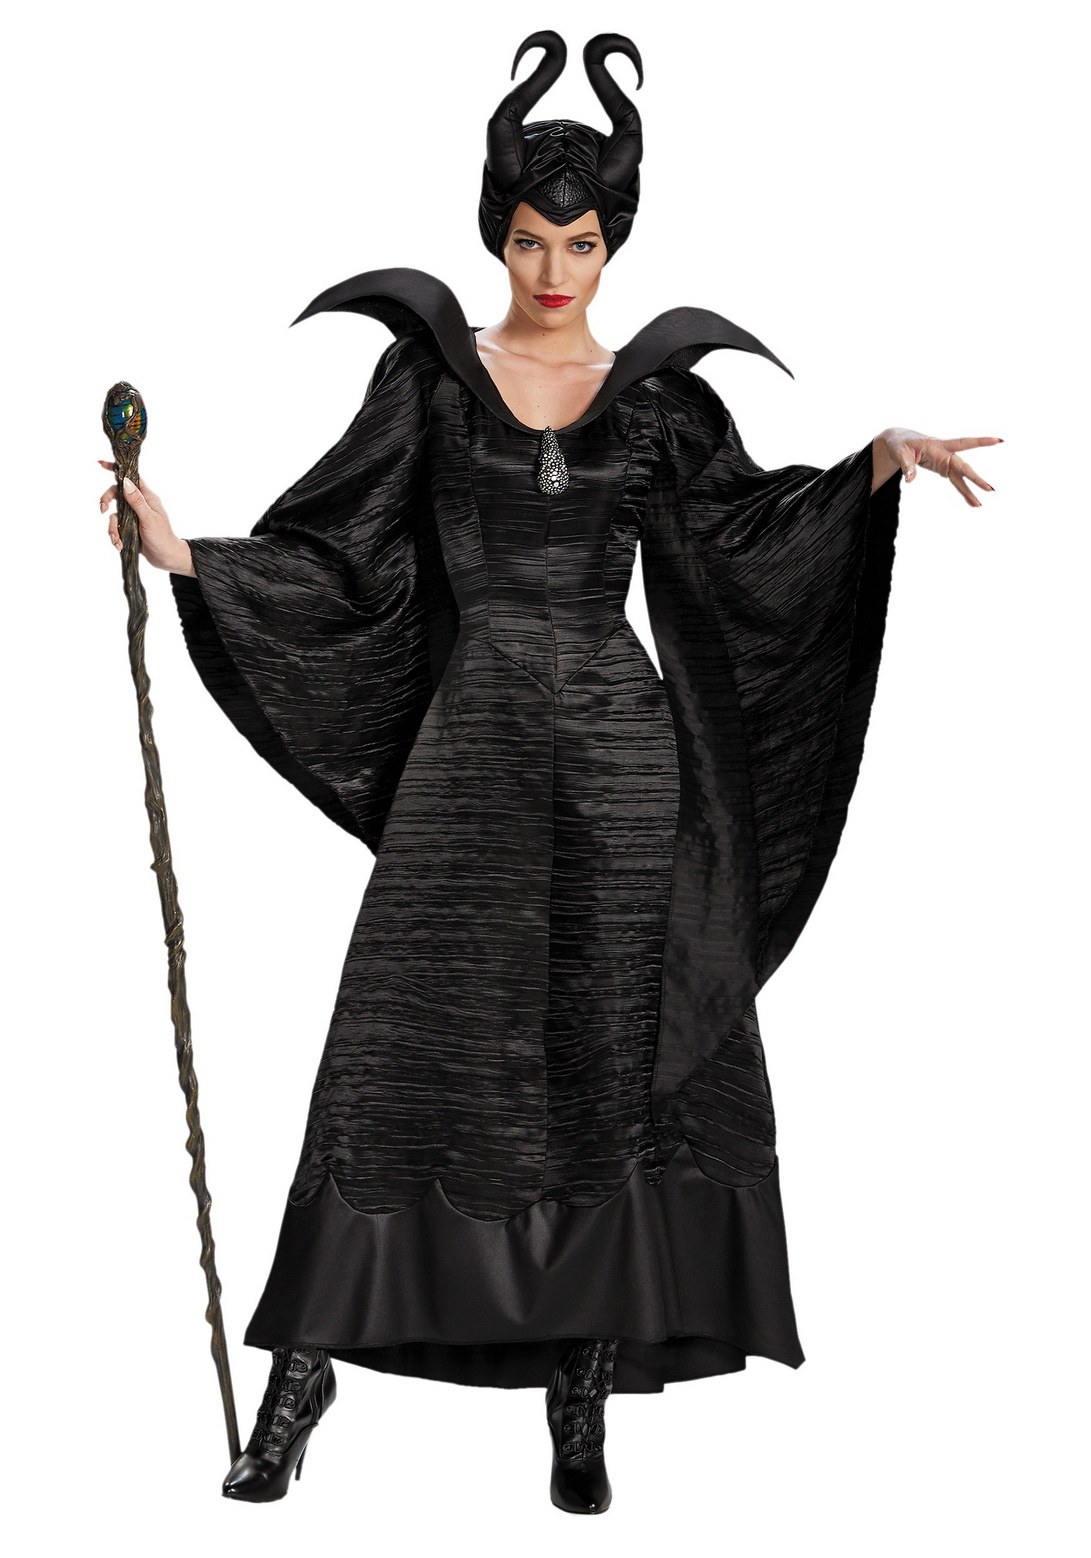 Adult Deluxe Maleficent Christening Black Gown Costume